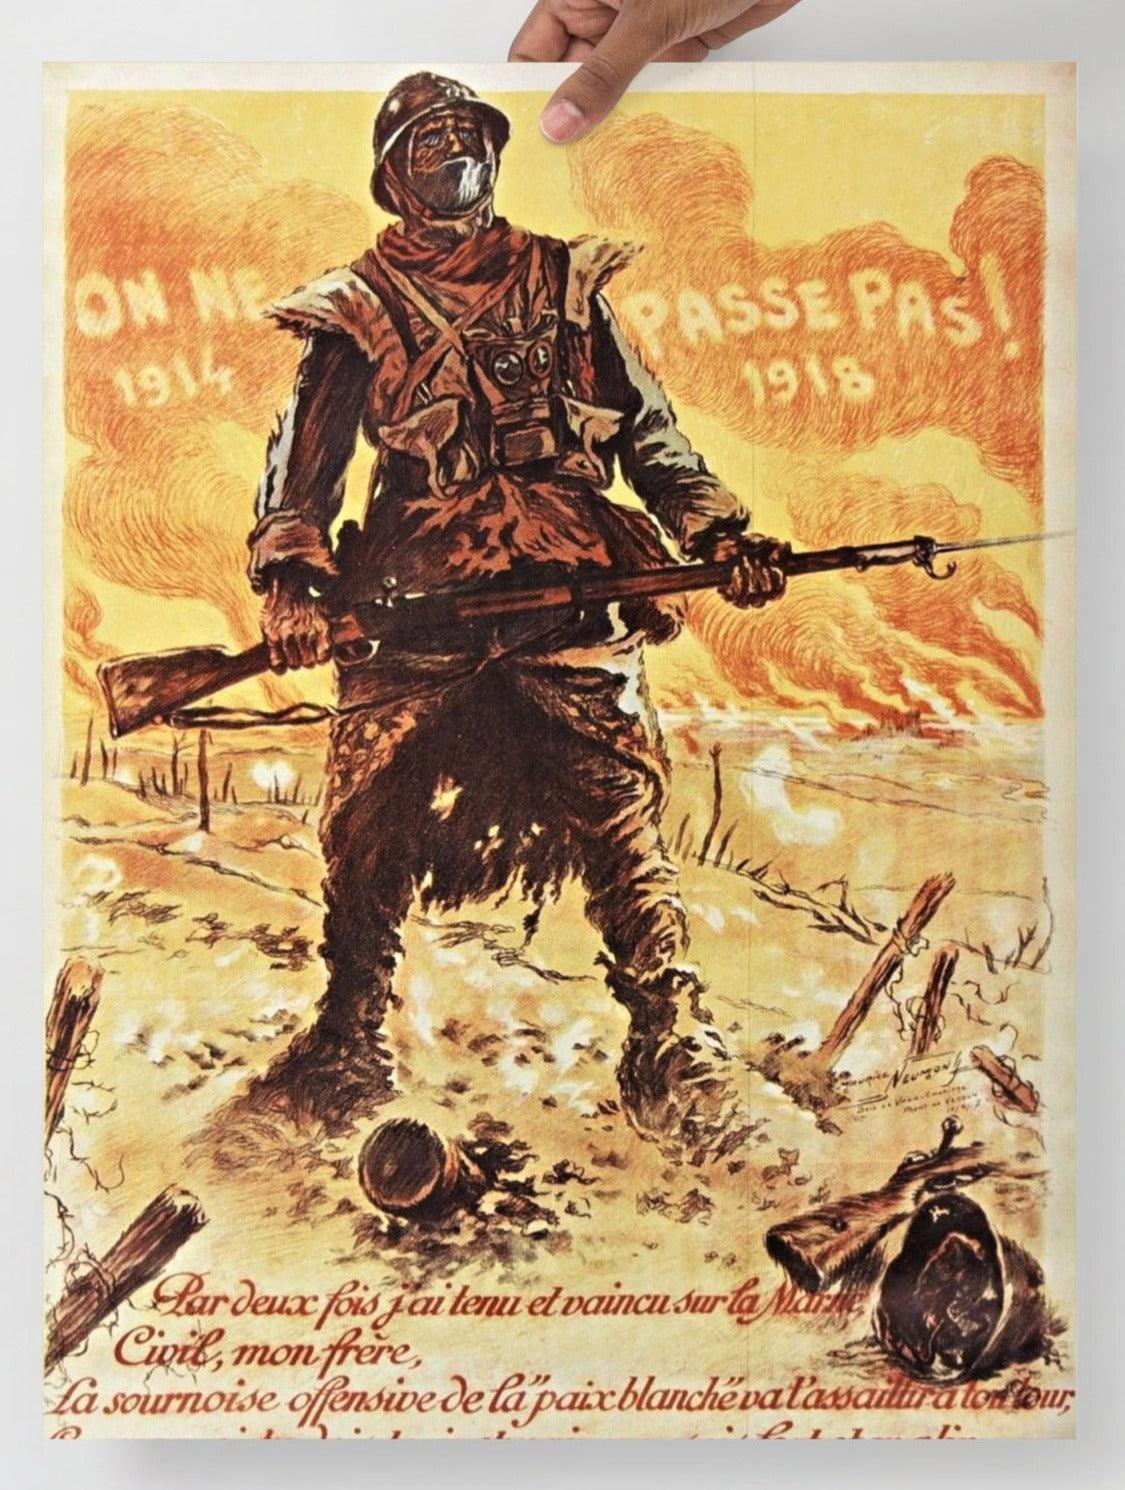 A They Shall Not Pass (On Ne Passe Pas) By Maurice Neumont poster on a plain backdrop in size 18x24”.